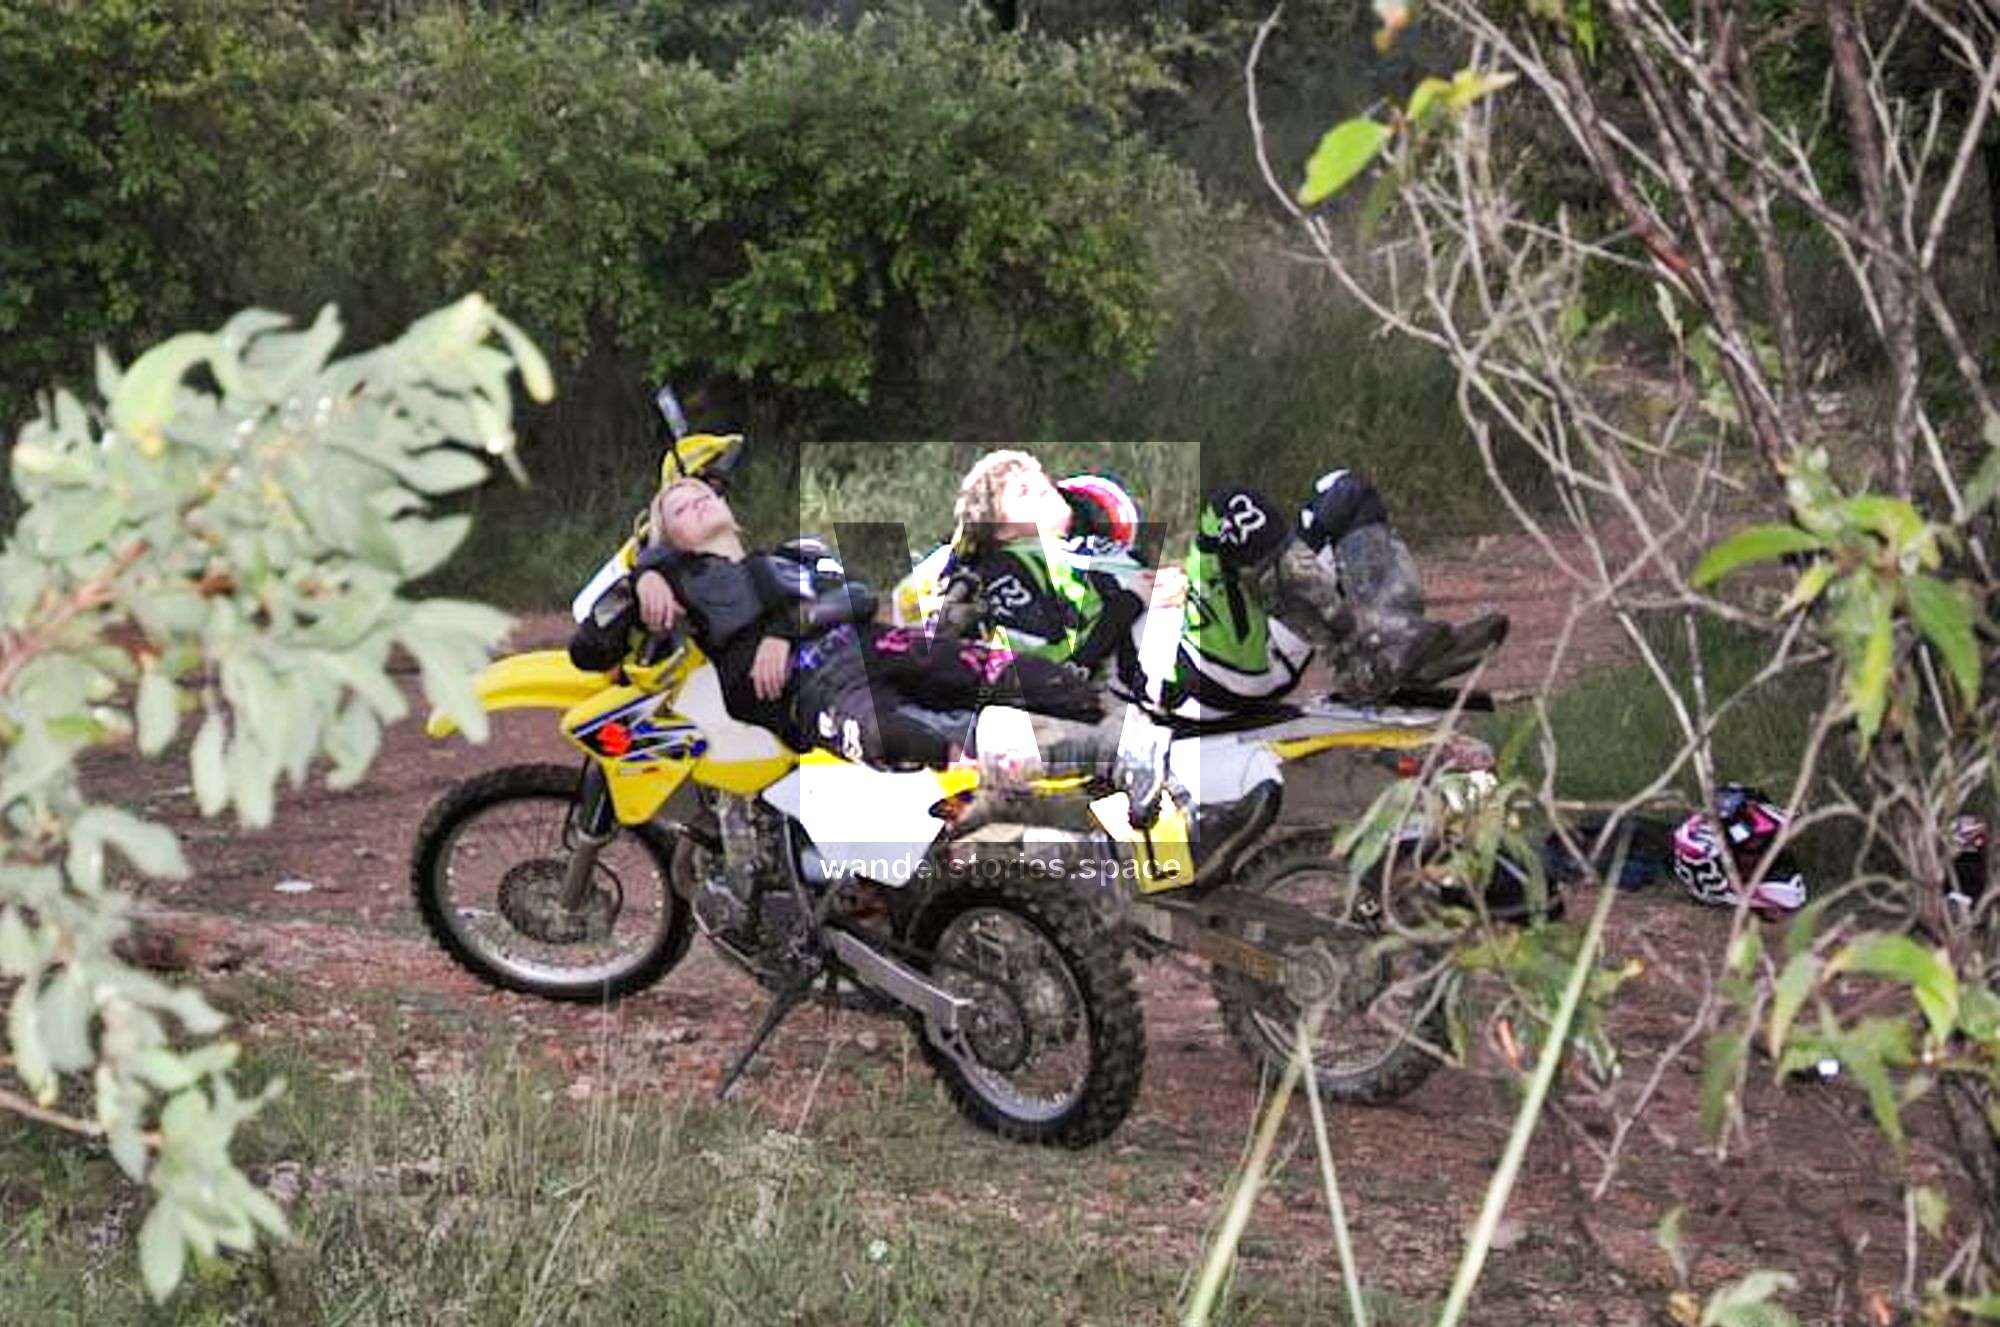 napping on dirtbikes